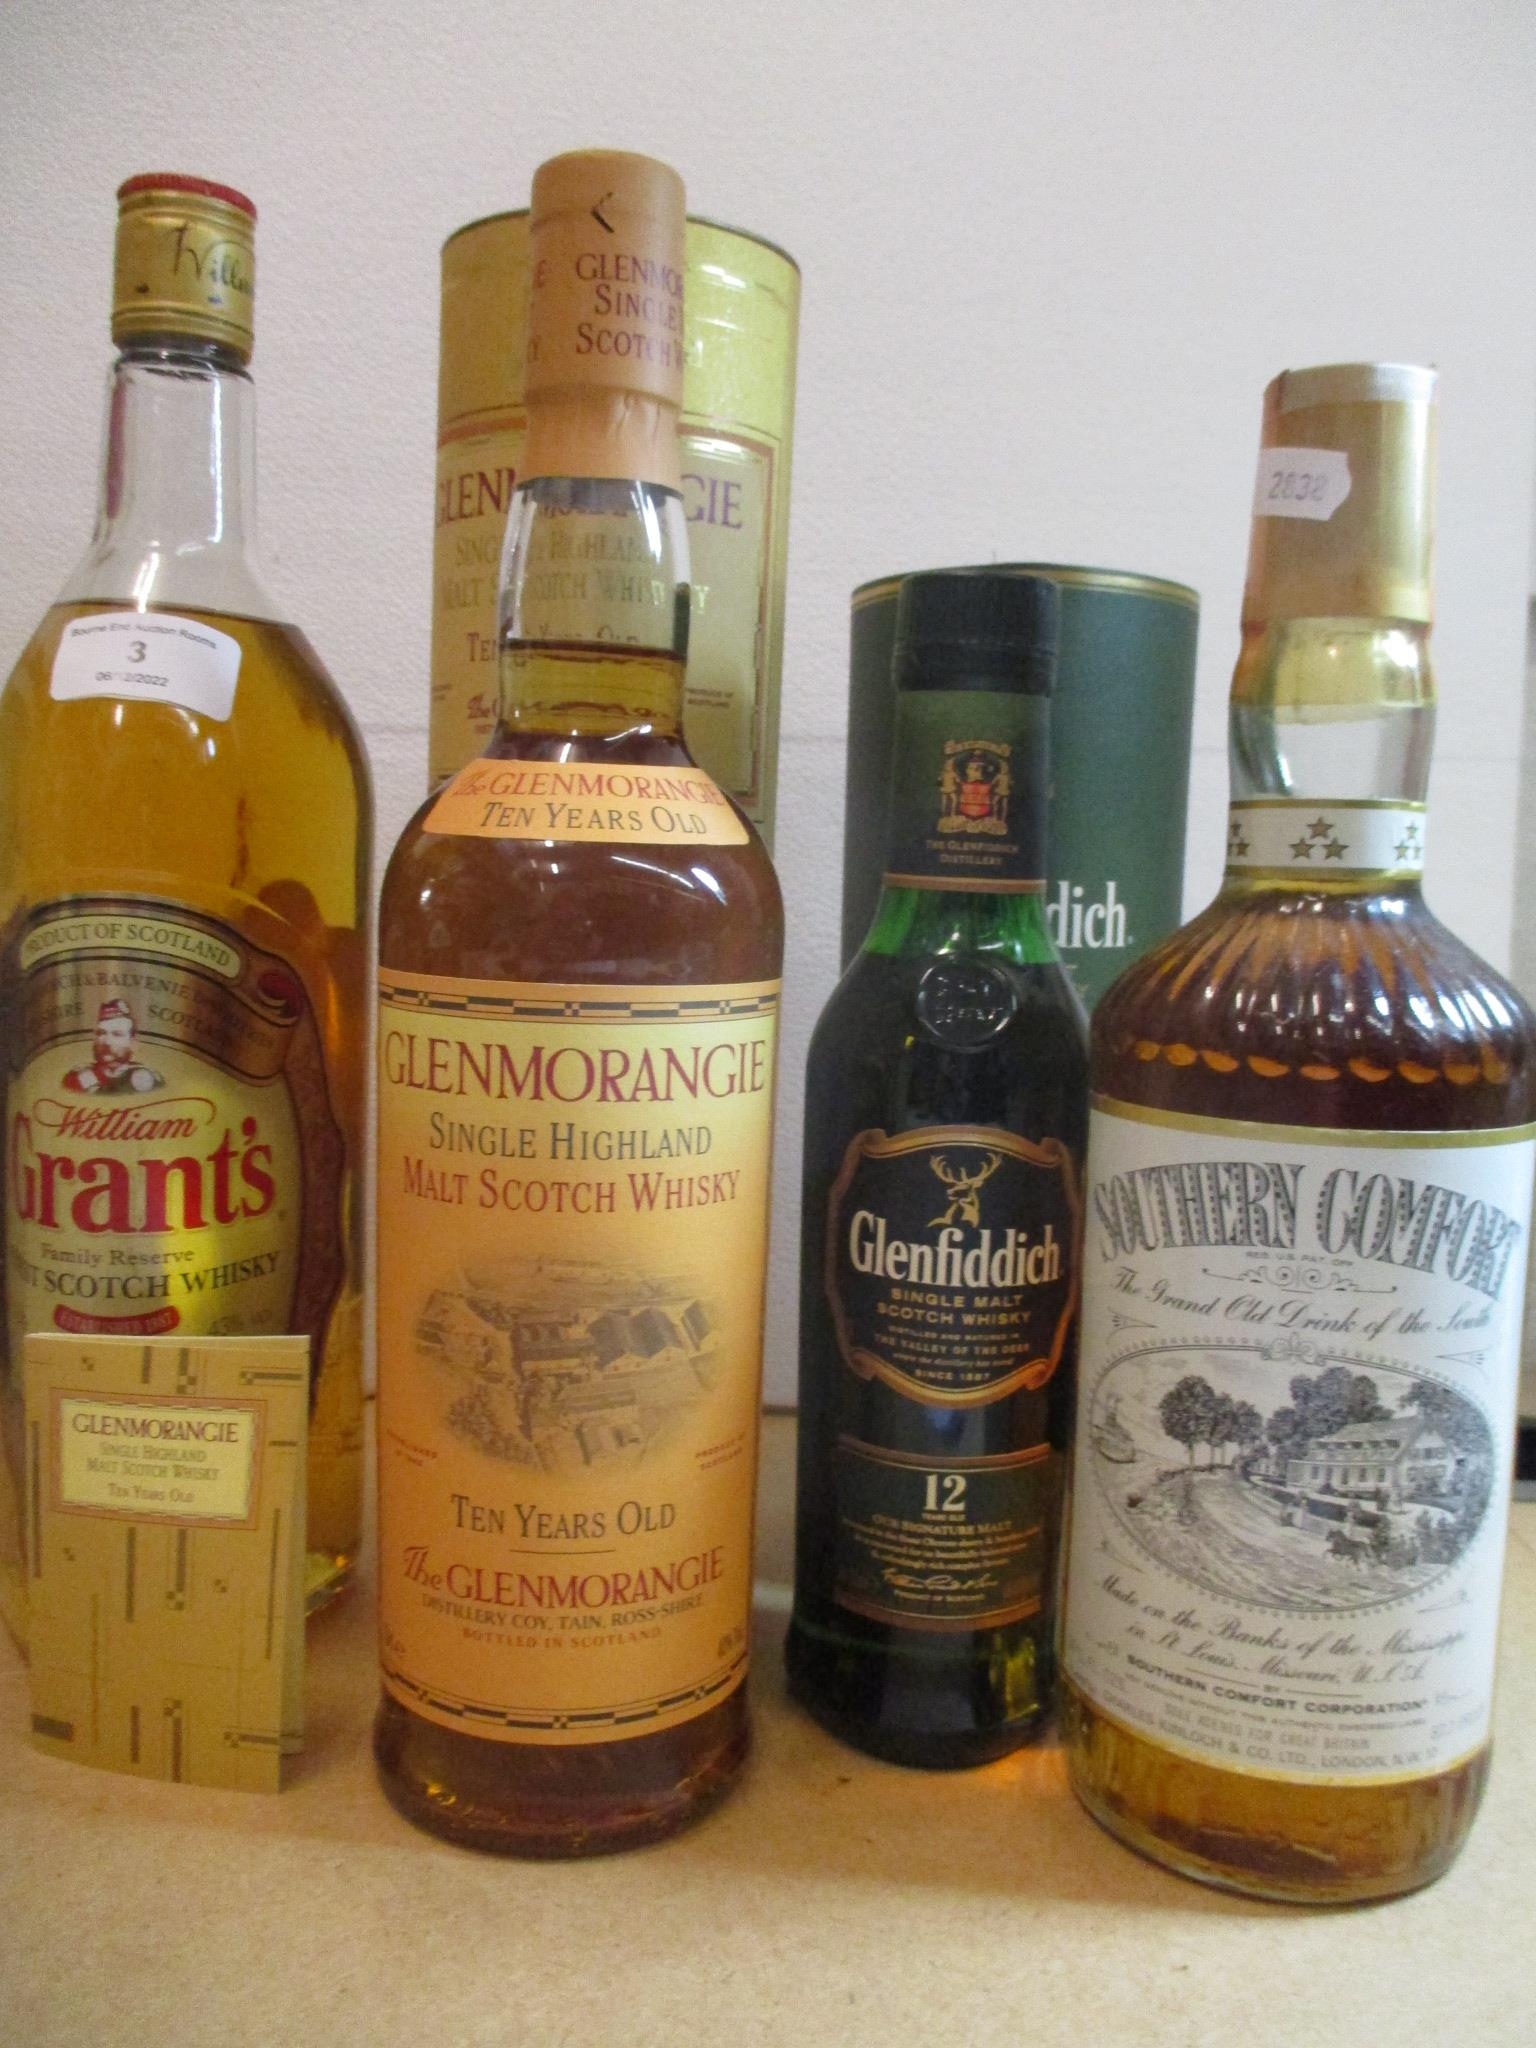 Three bottles of scotch whisky to include Glenmorangie single malt 10 year old, 70cl, Glenfiddich 12